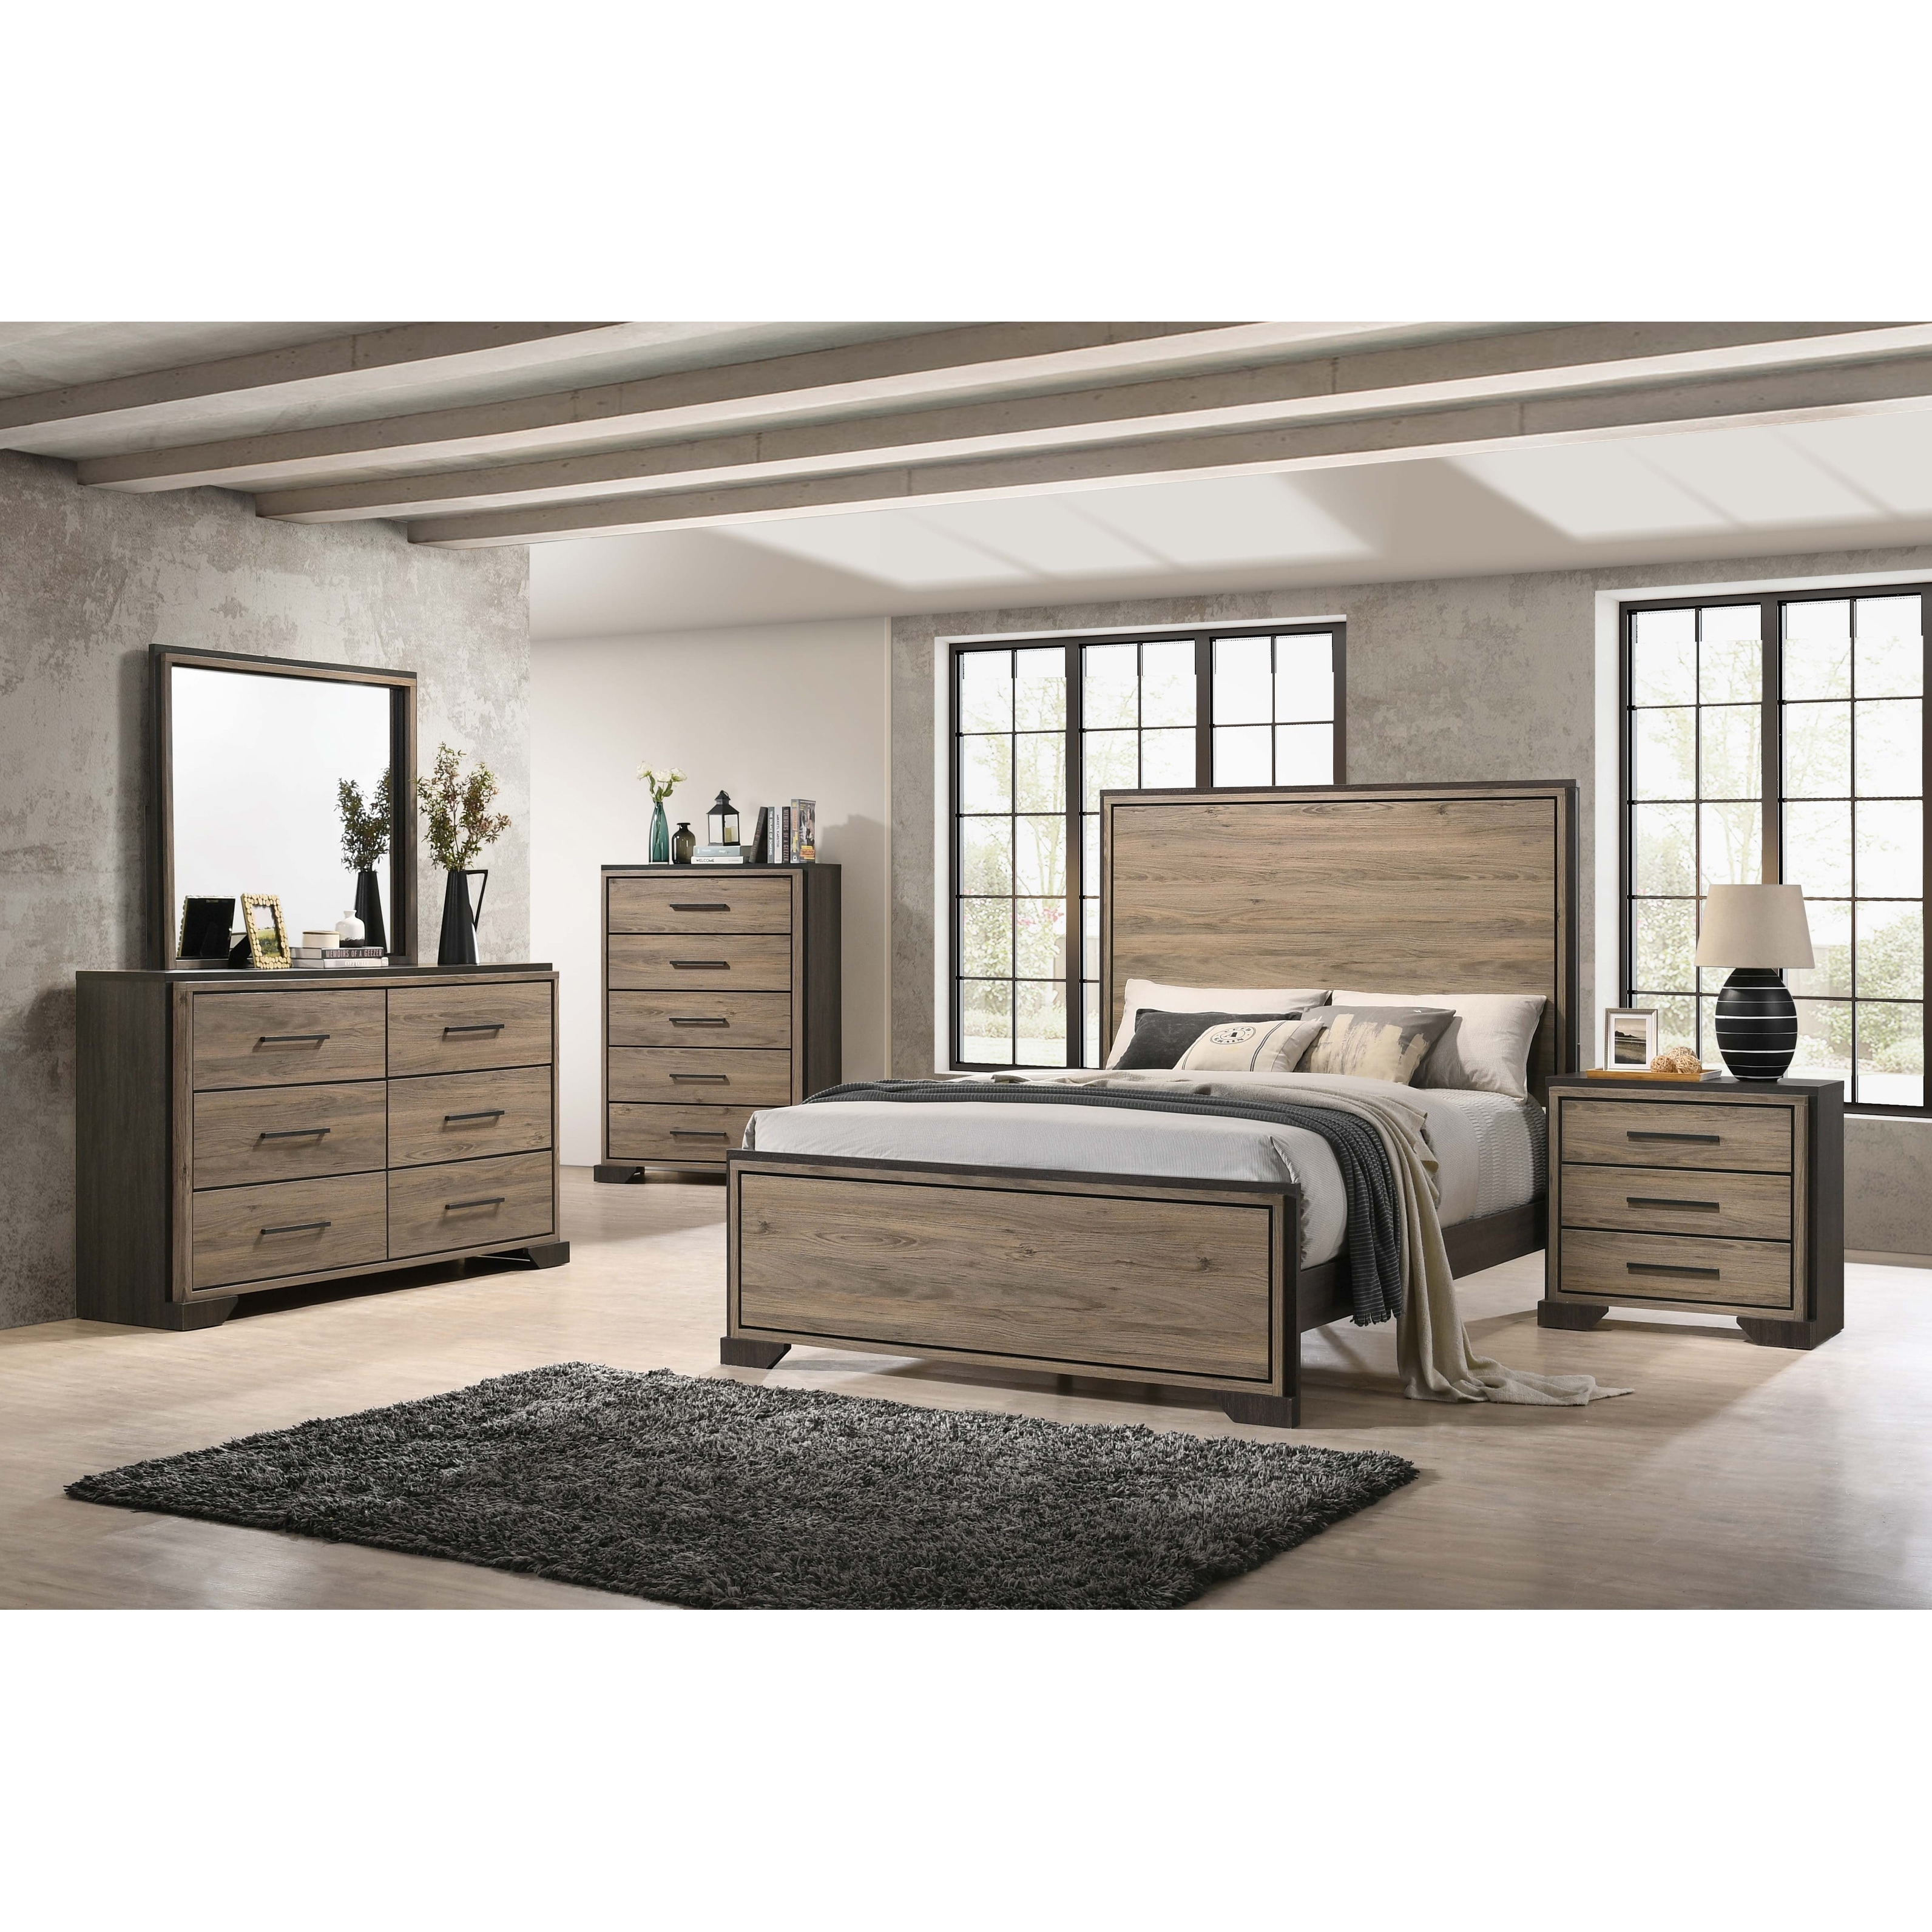 Coaster Baker 4-Piece California King Bedroom Set Brown and Light Taupe